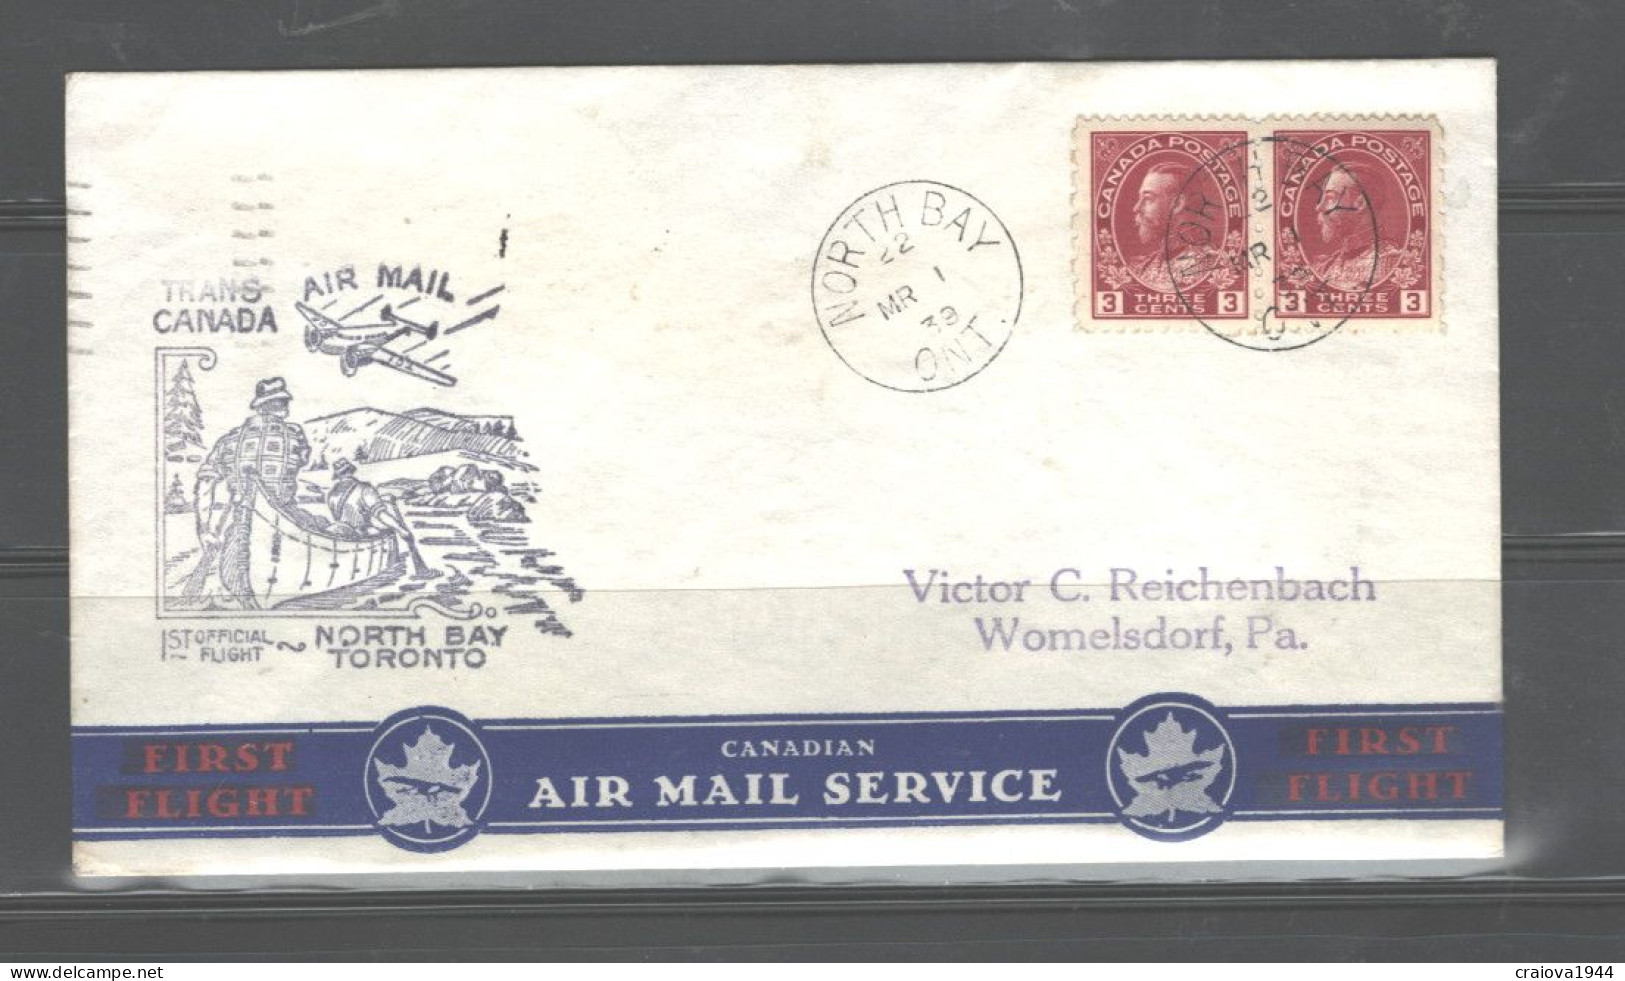 CANADA 01 MARCH 1939 NORTH BAY To TORONTO 1st OFFICIAL FLIGHT - Lettres & Documents